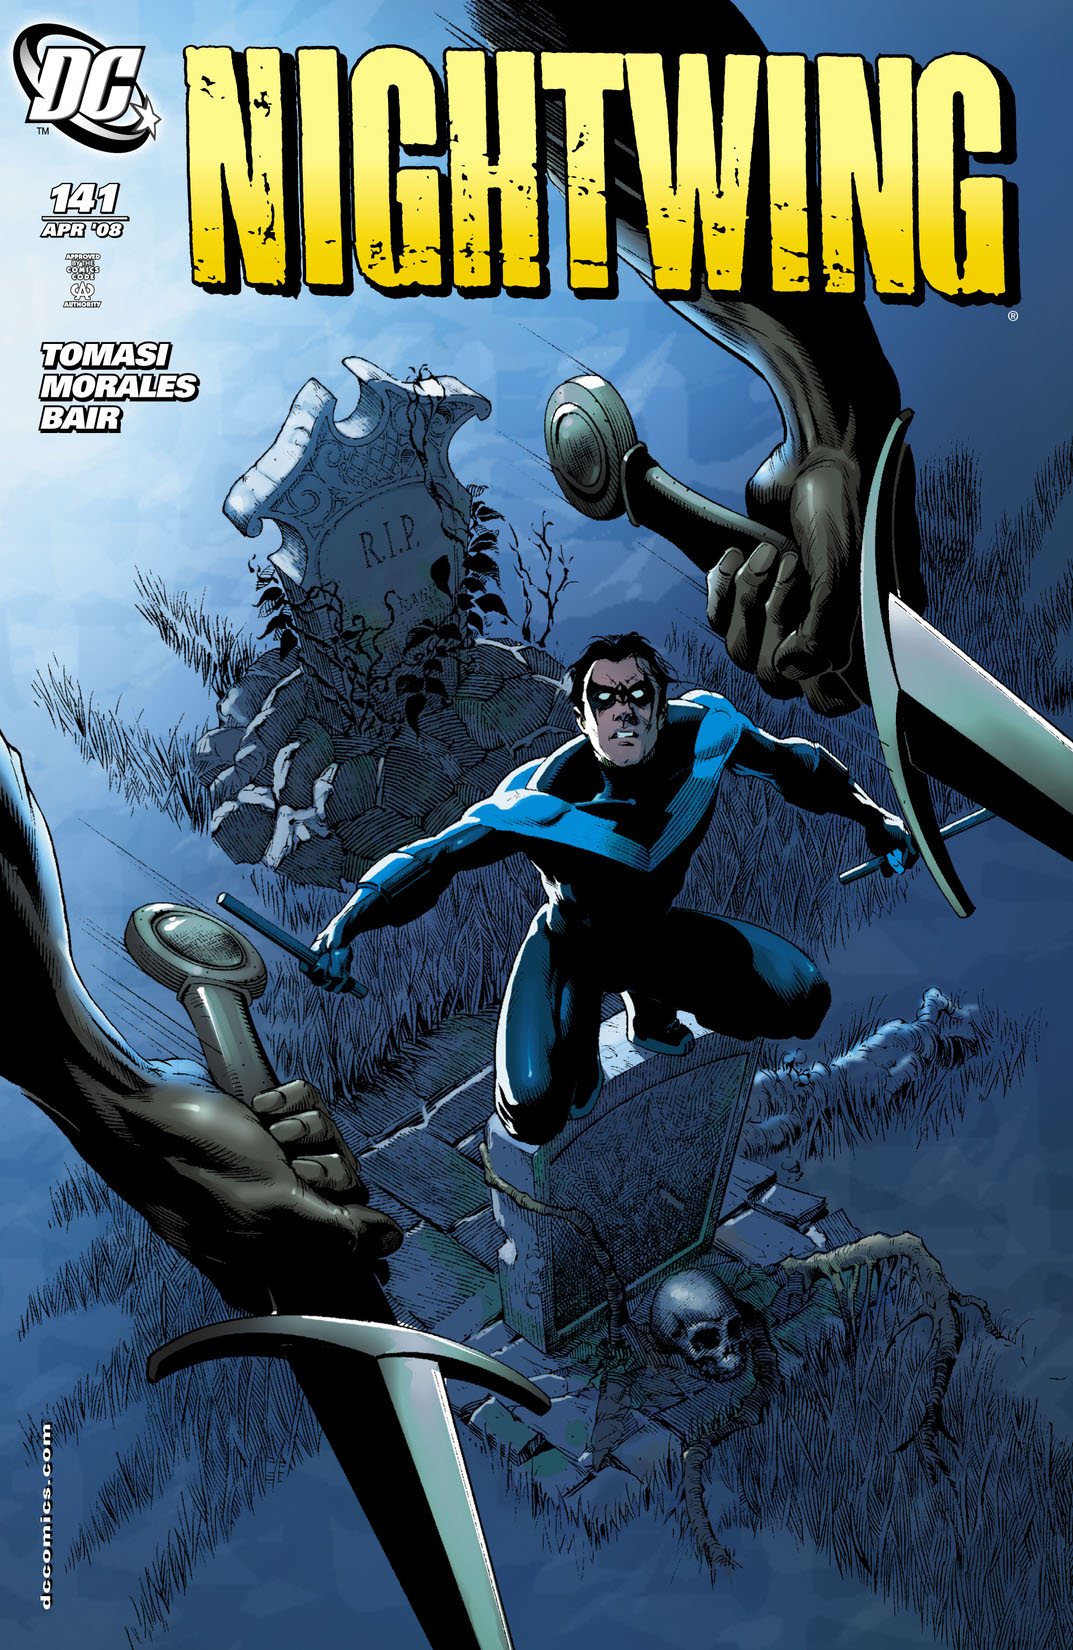 Nightwing (1996-) #141 preview images